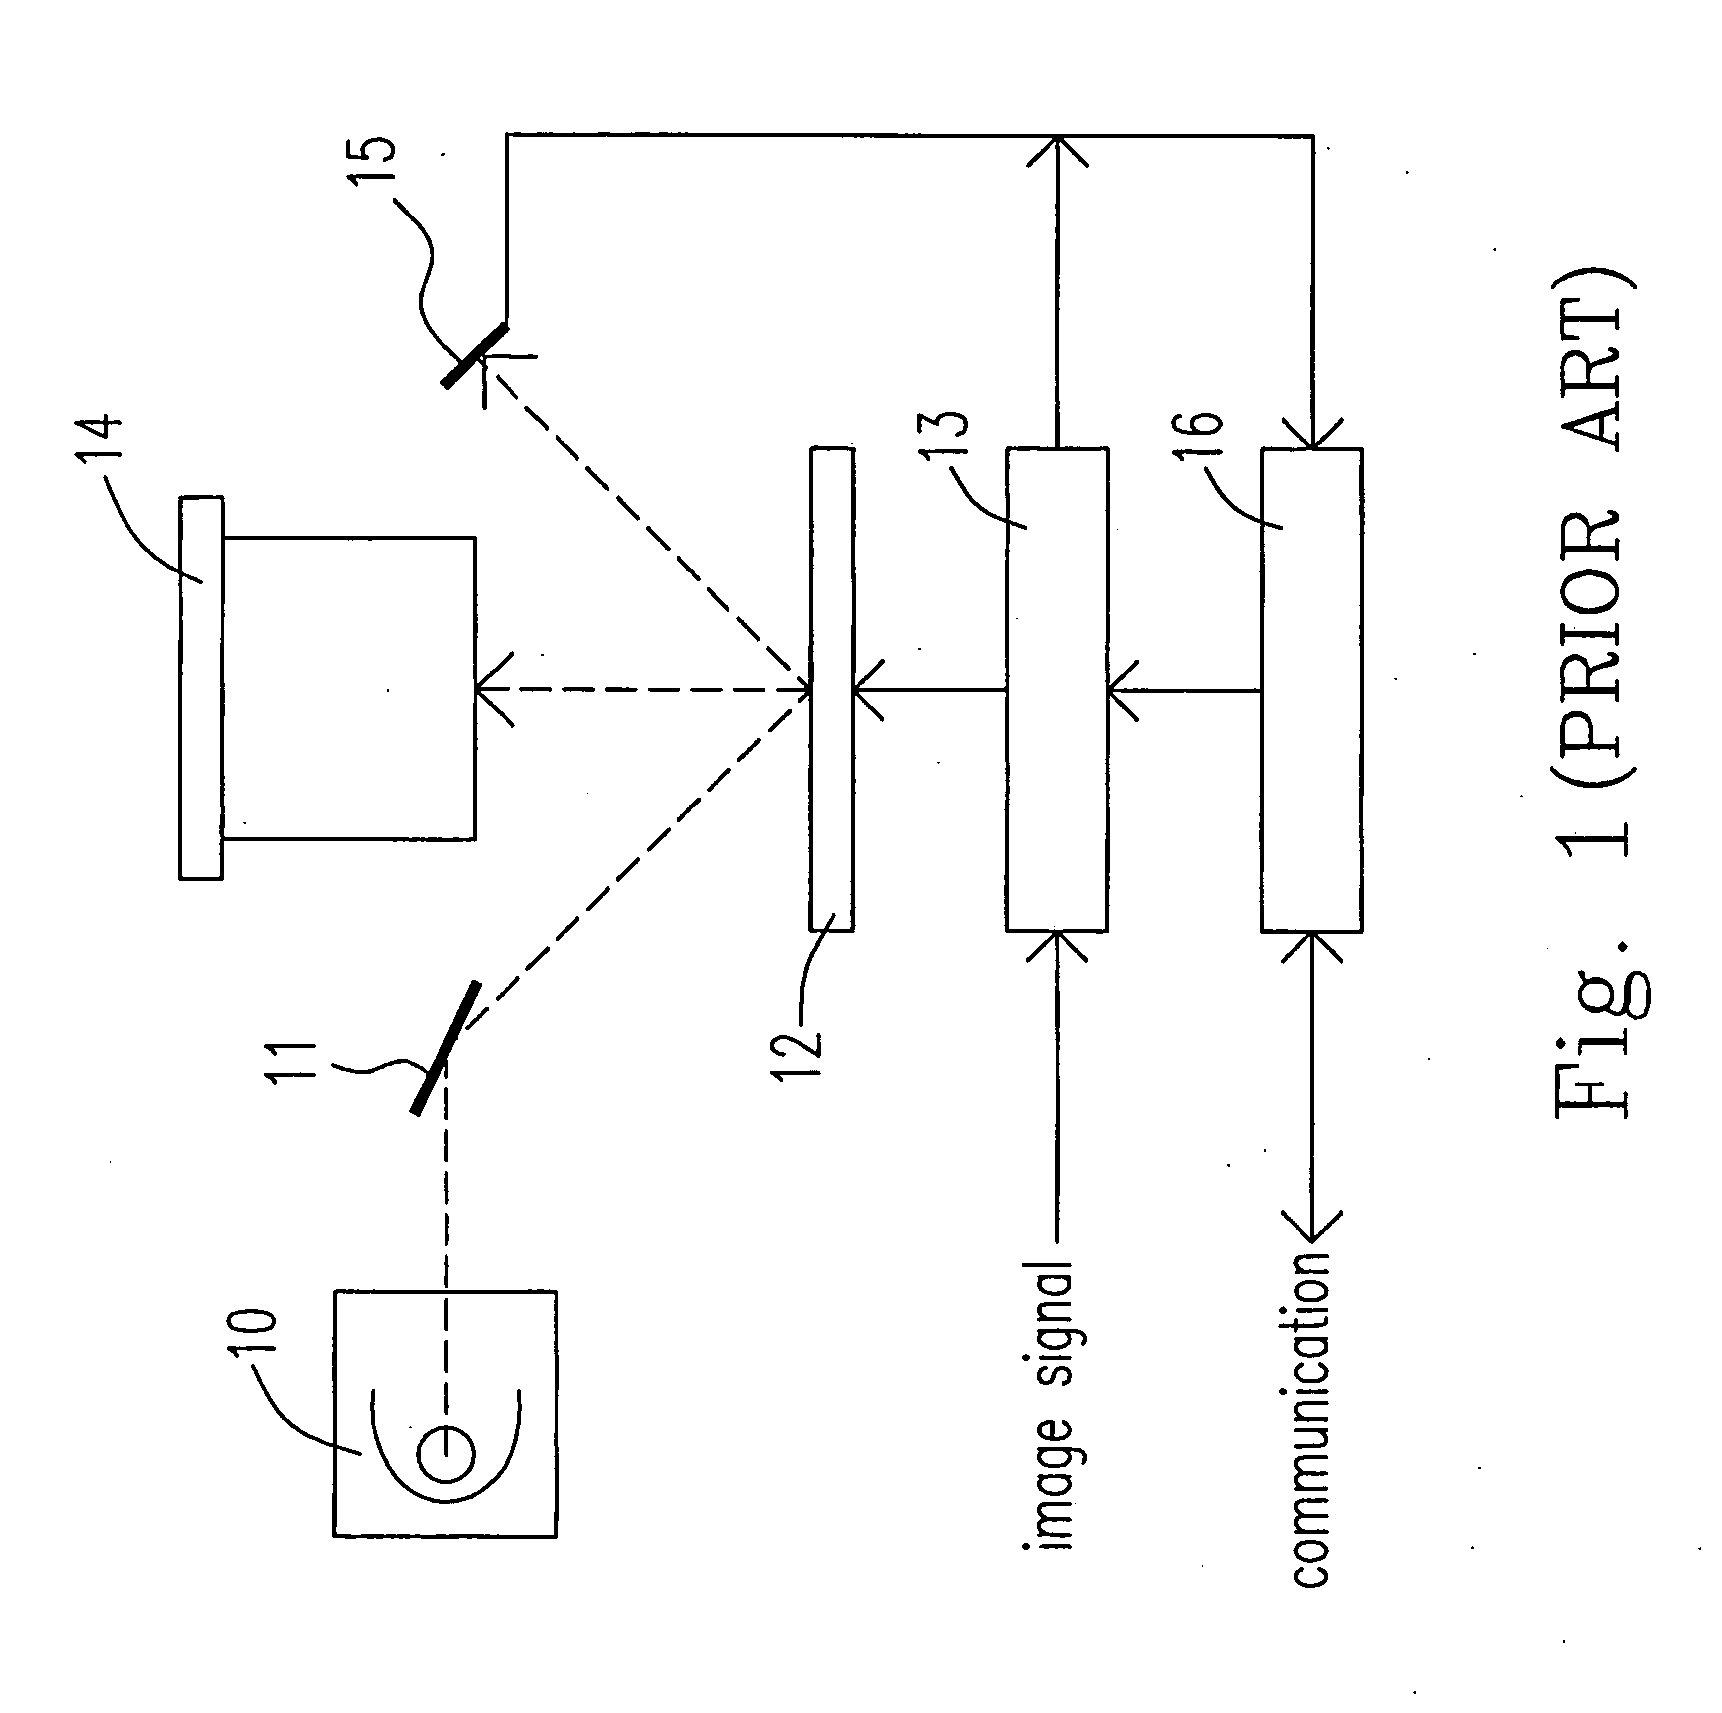 Brightness-adjusting device for video wall system and method therefor